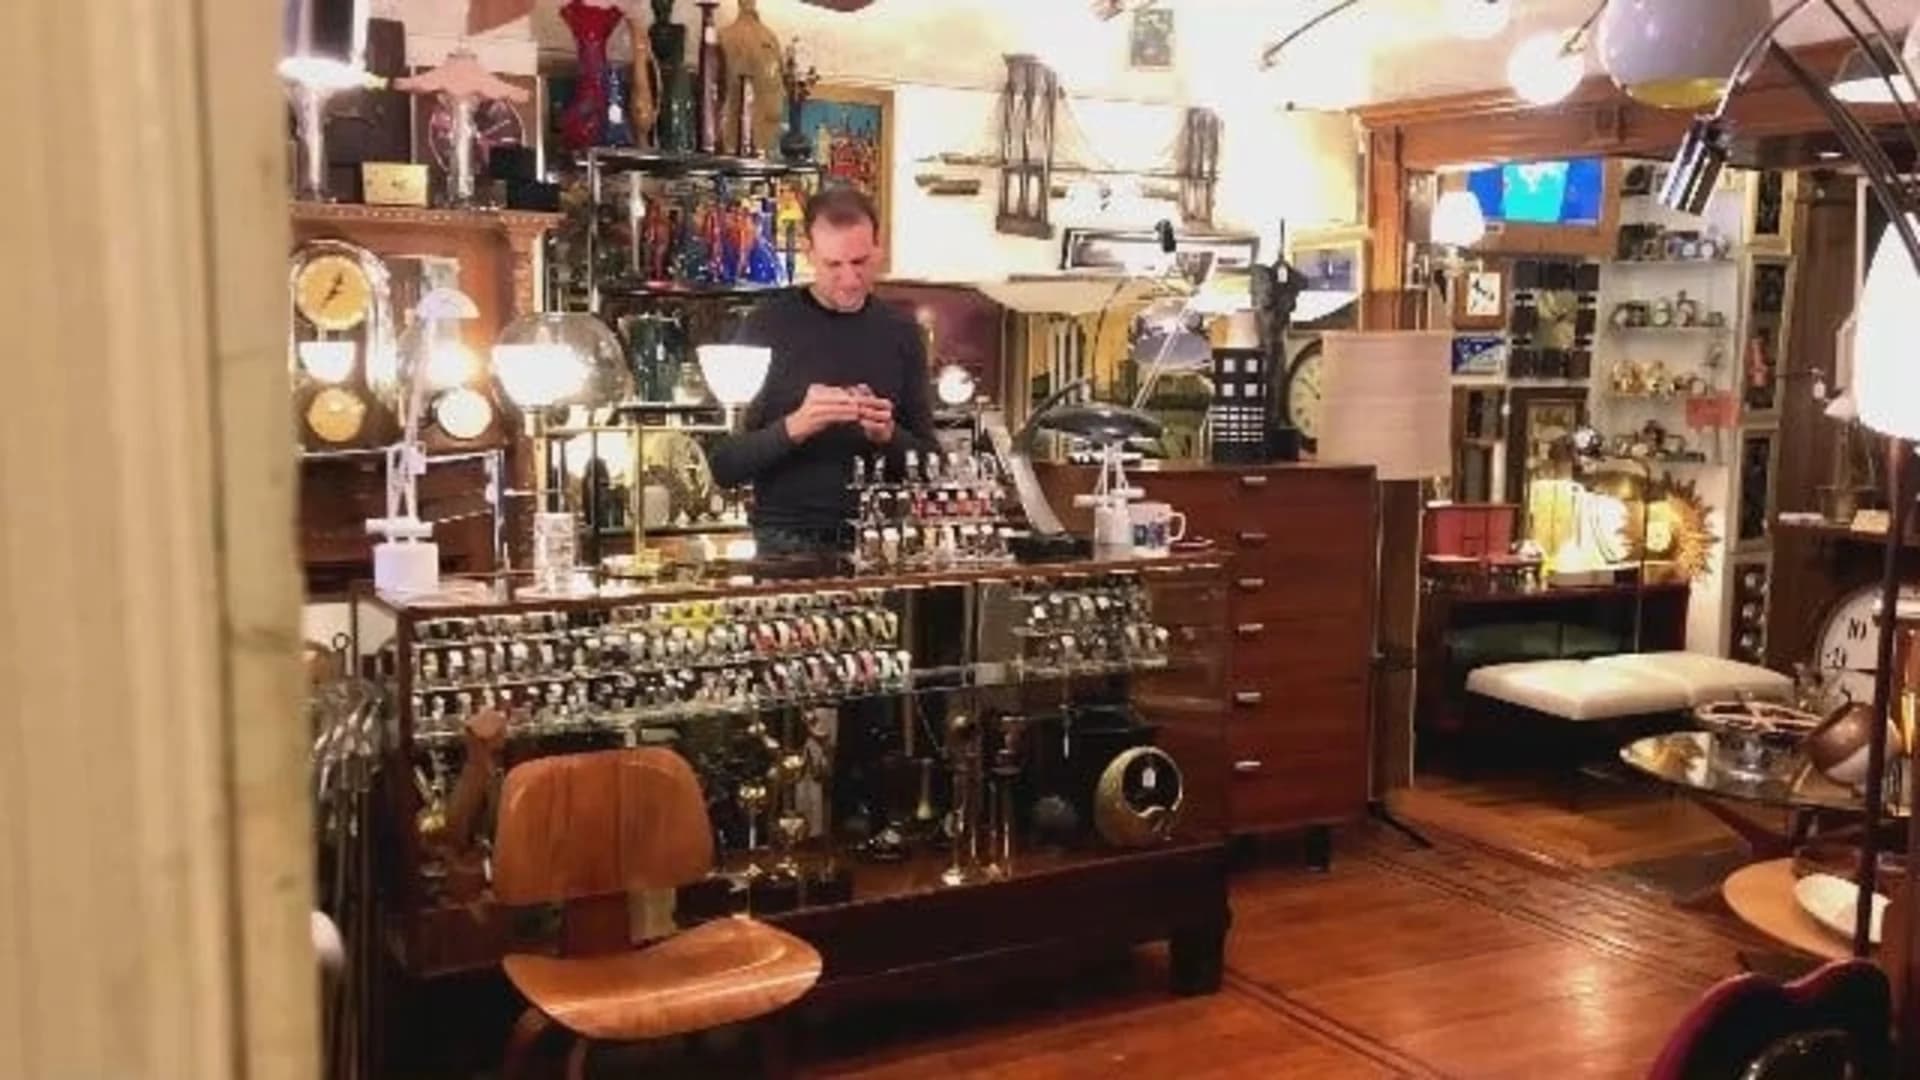 Brooklyn vintage shop offers one-of-a kind items